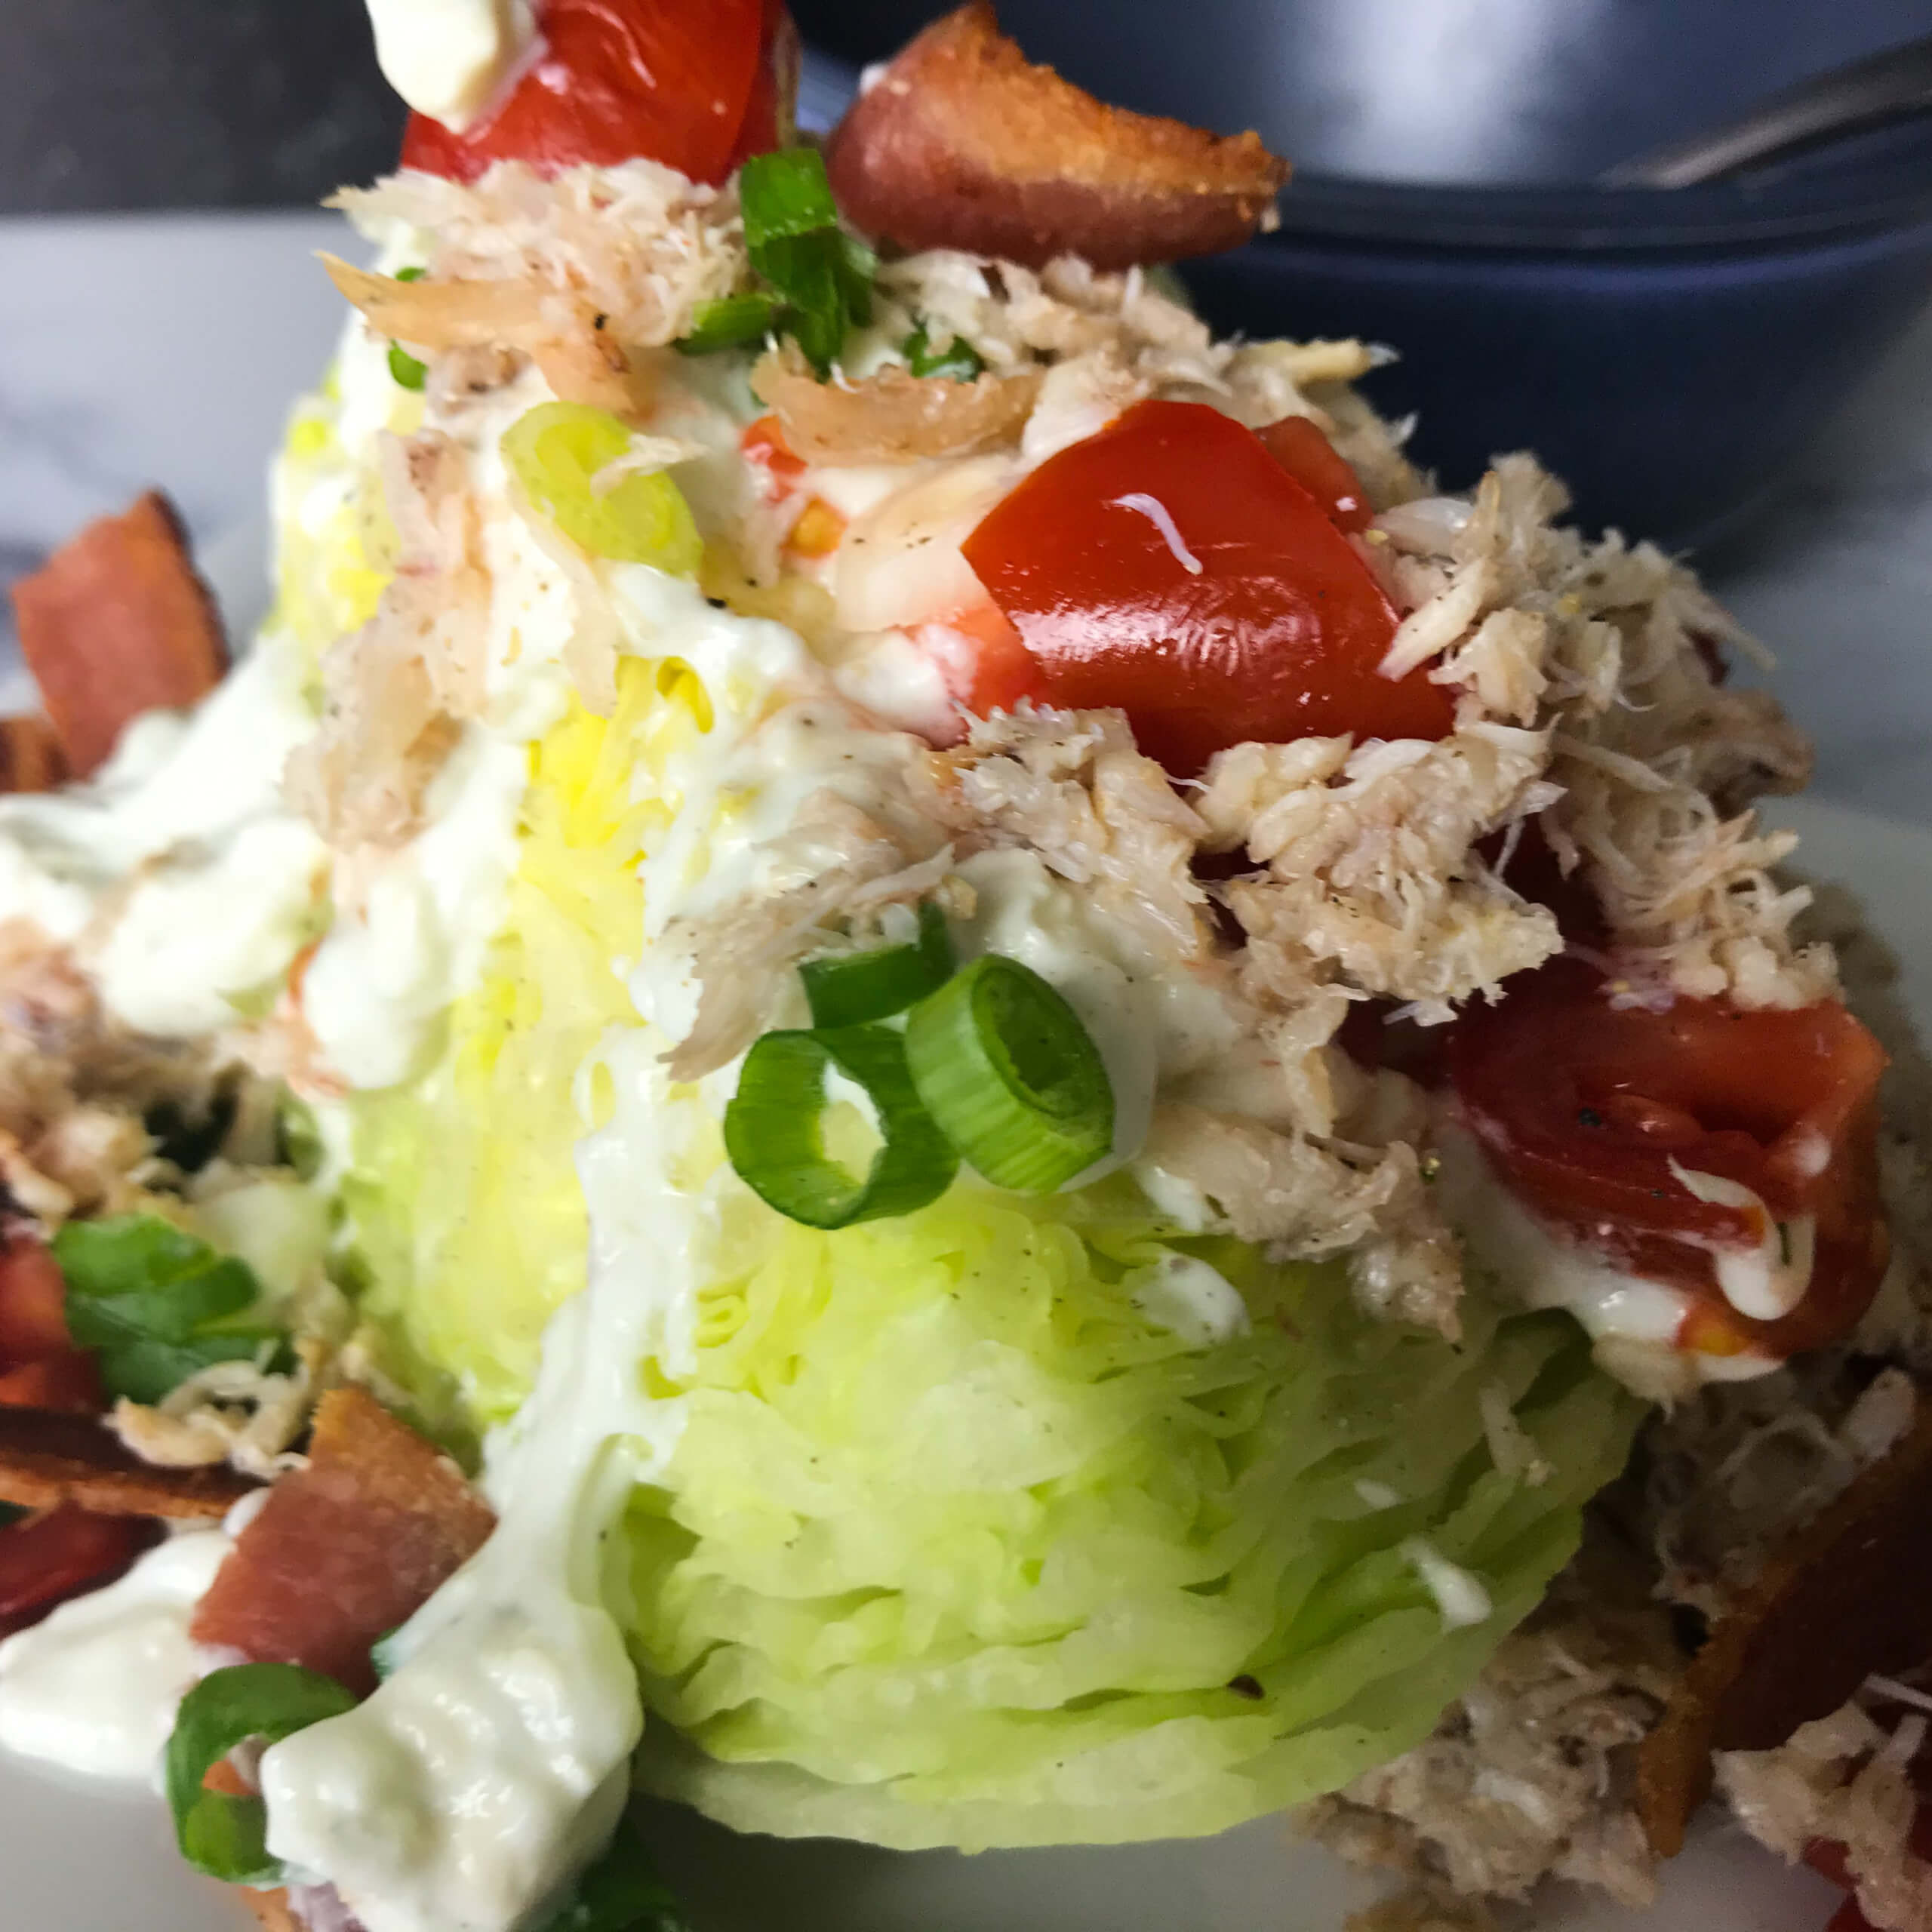 Classic Wedge Salad with Creamy Blue Cheese Dressing & Crab | My Curated Tastes